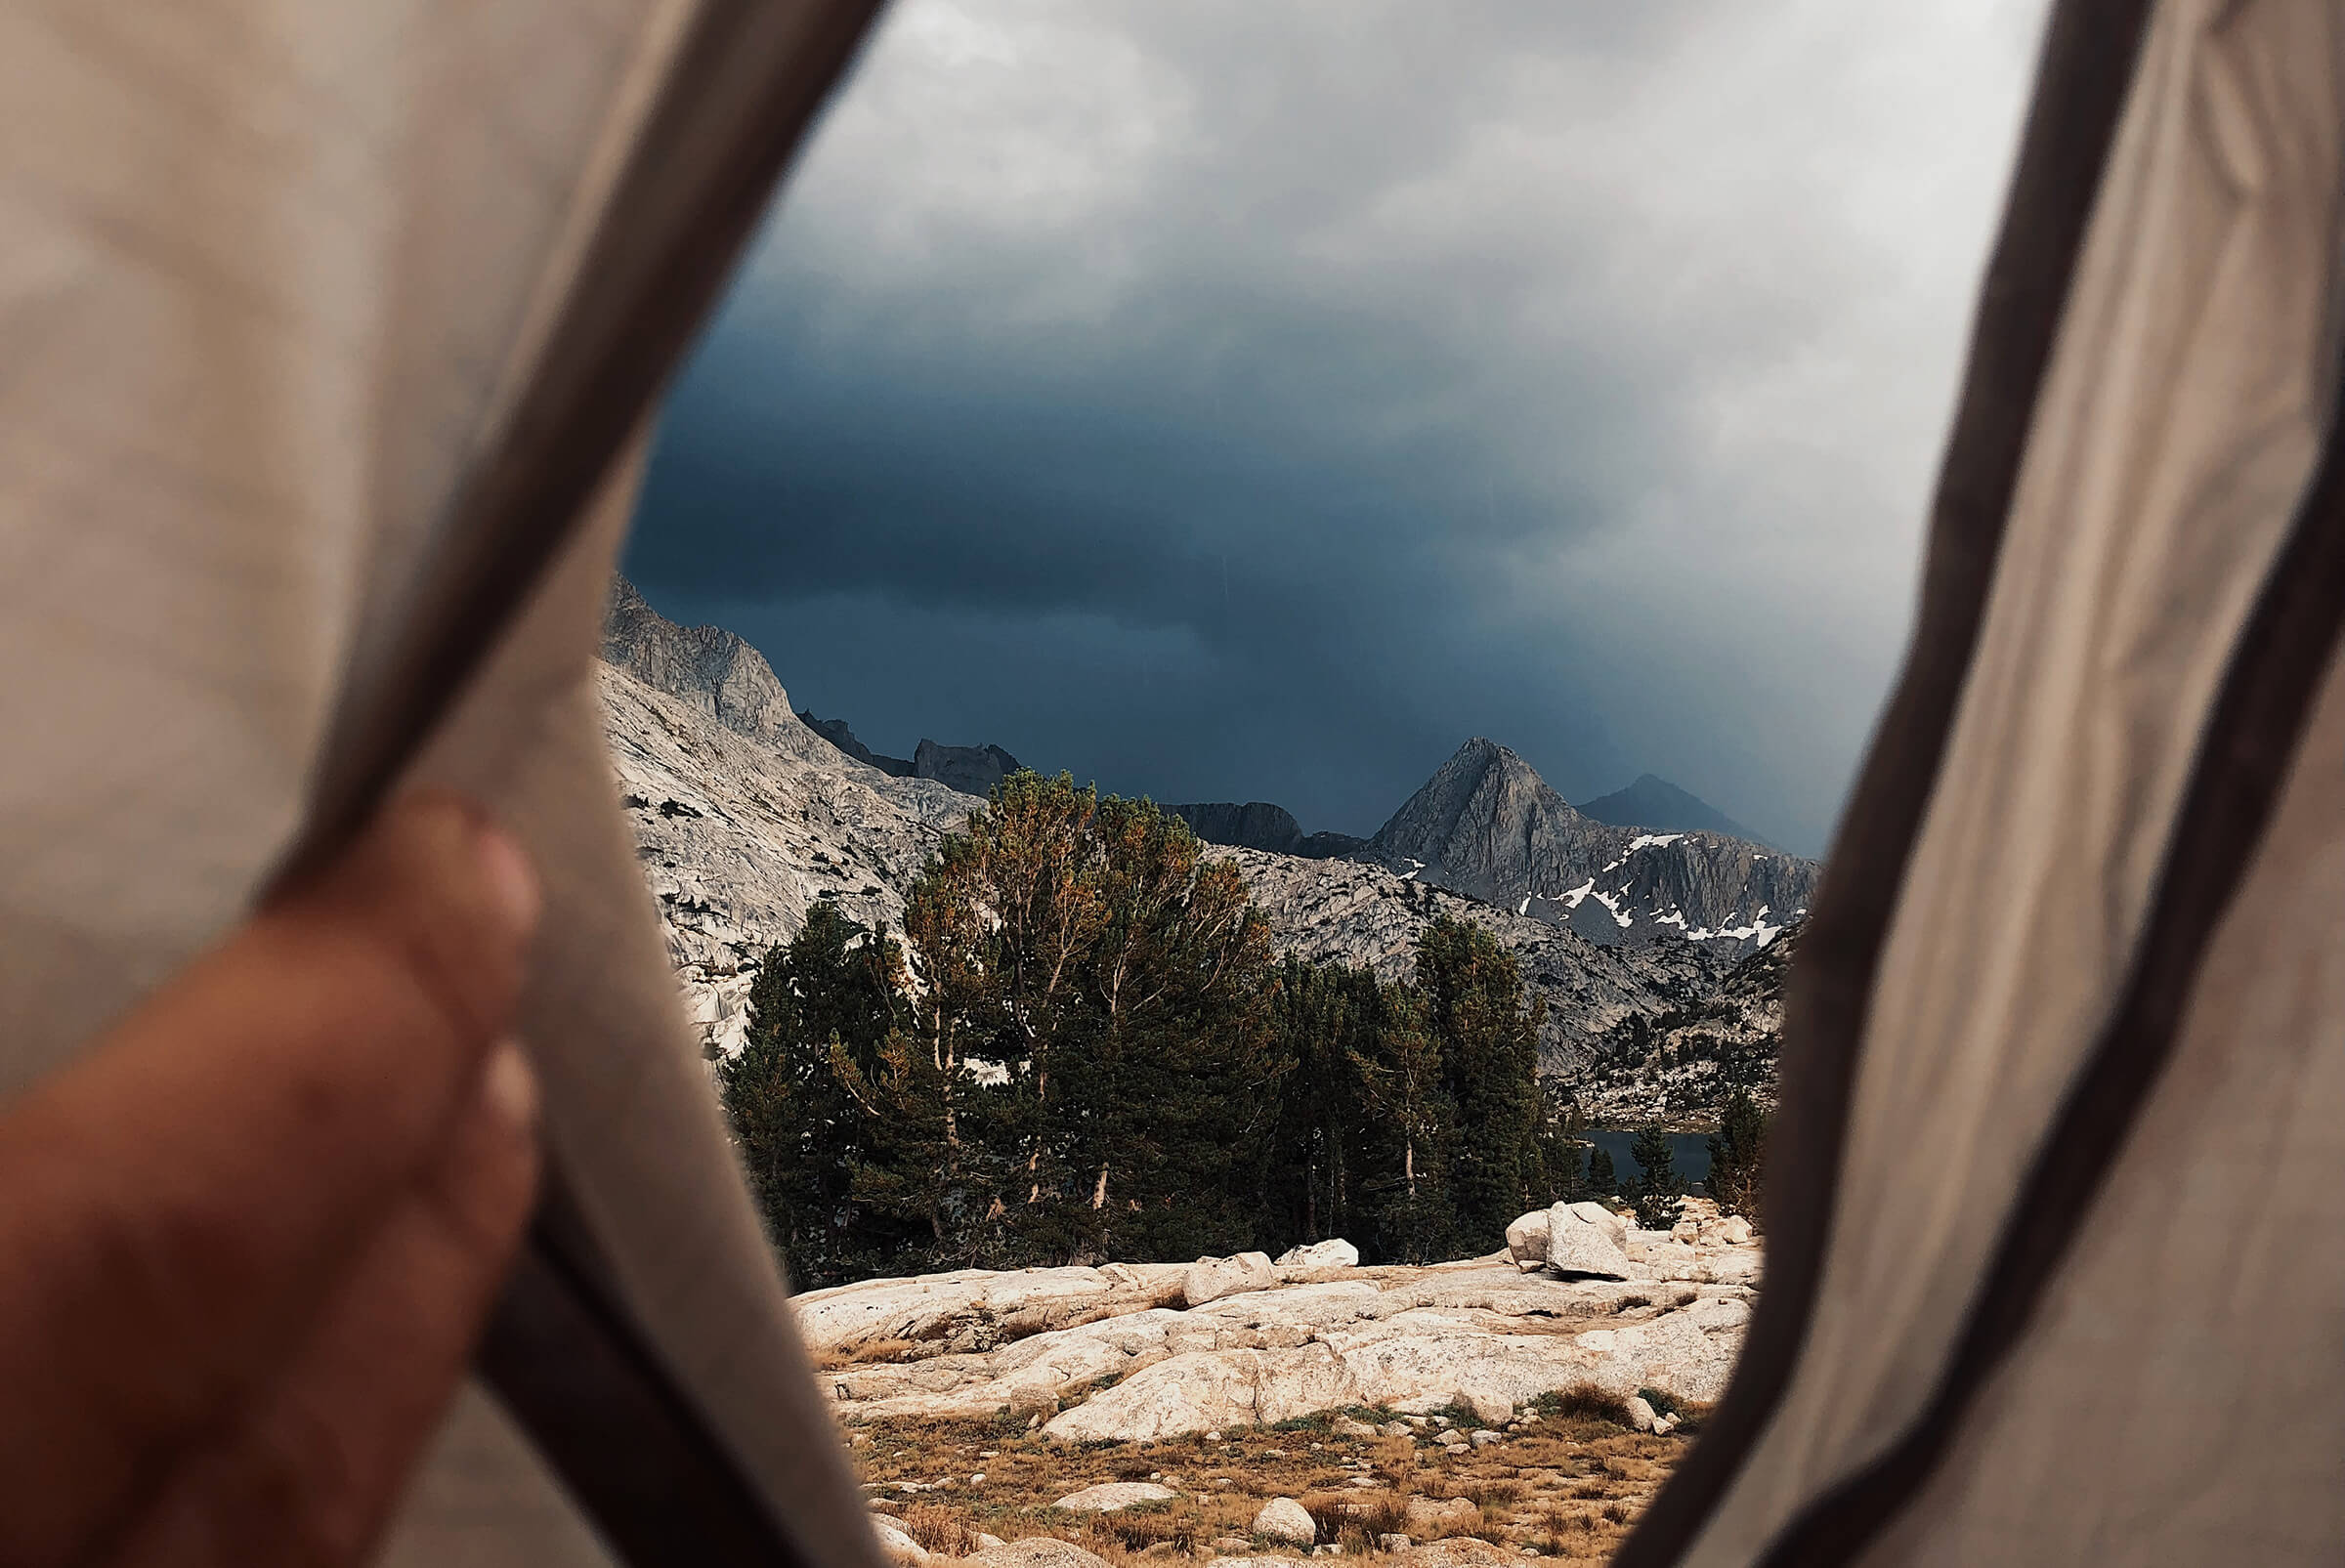 High Sierra PCT watching the storm roll in from my tent